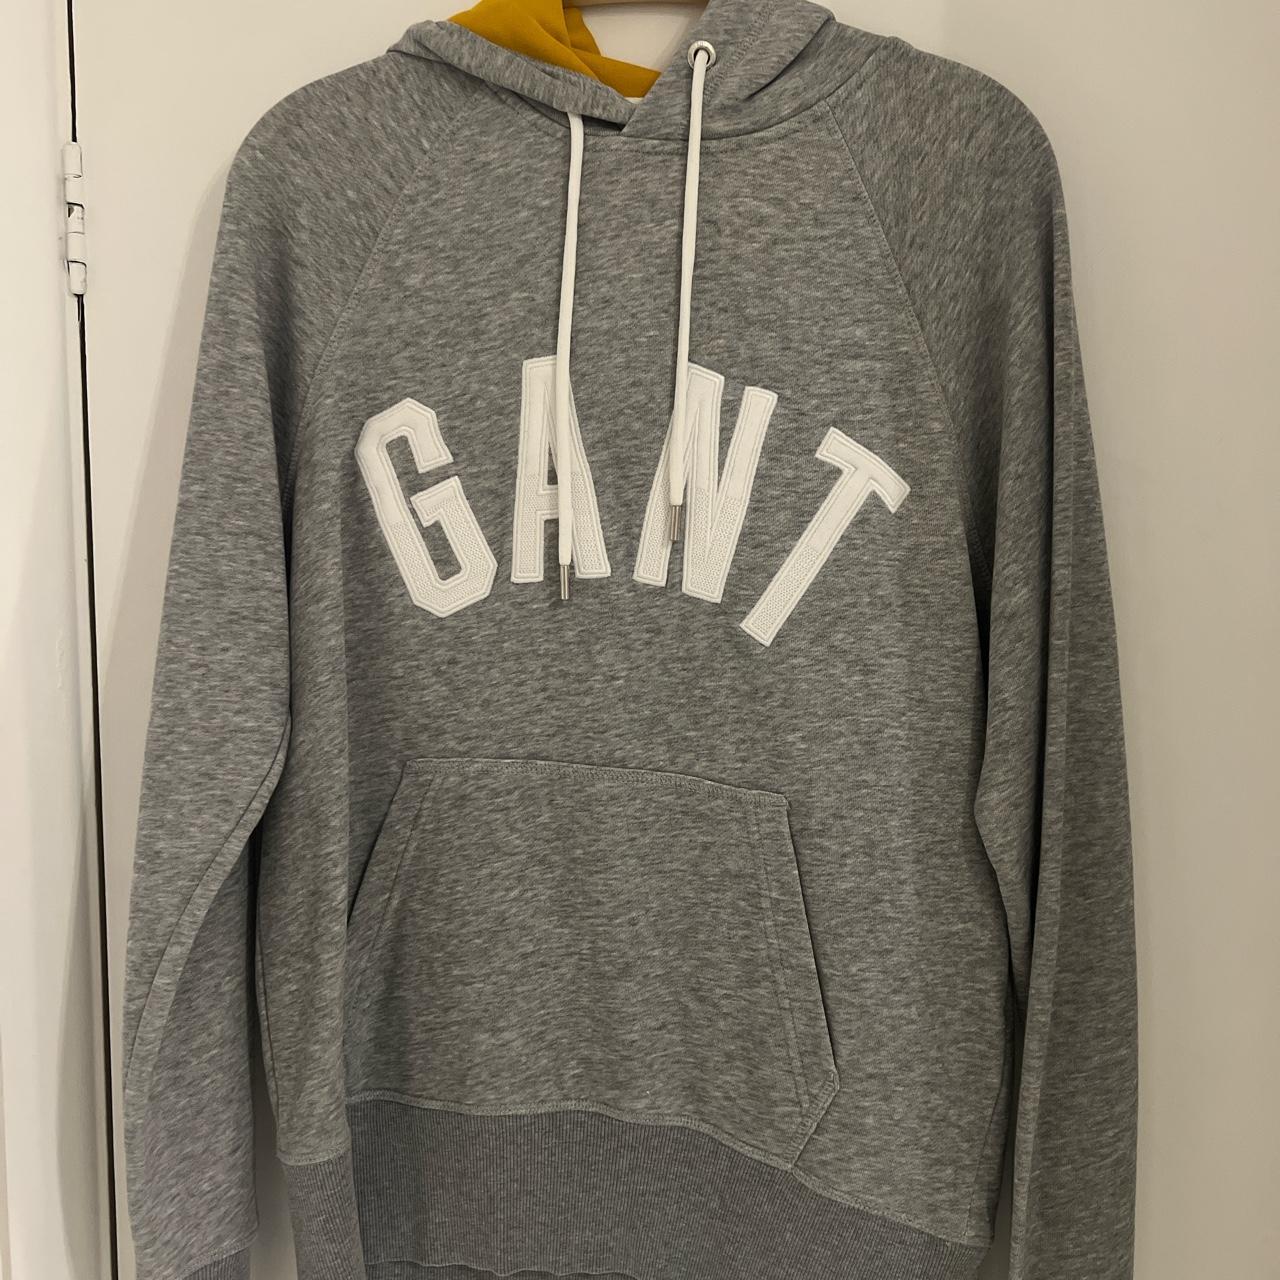 Grey gant hoodie with white logo and yellow... - Depop